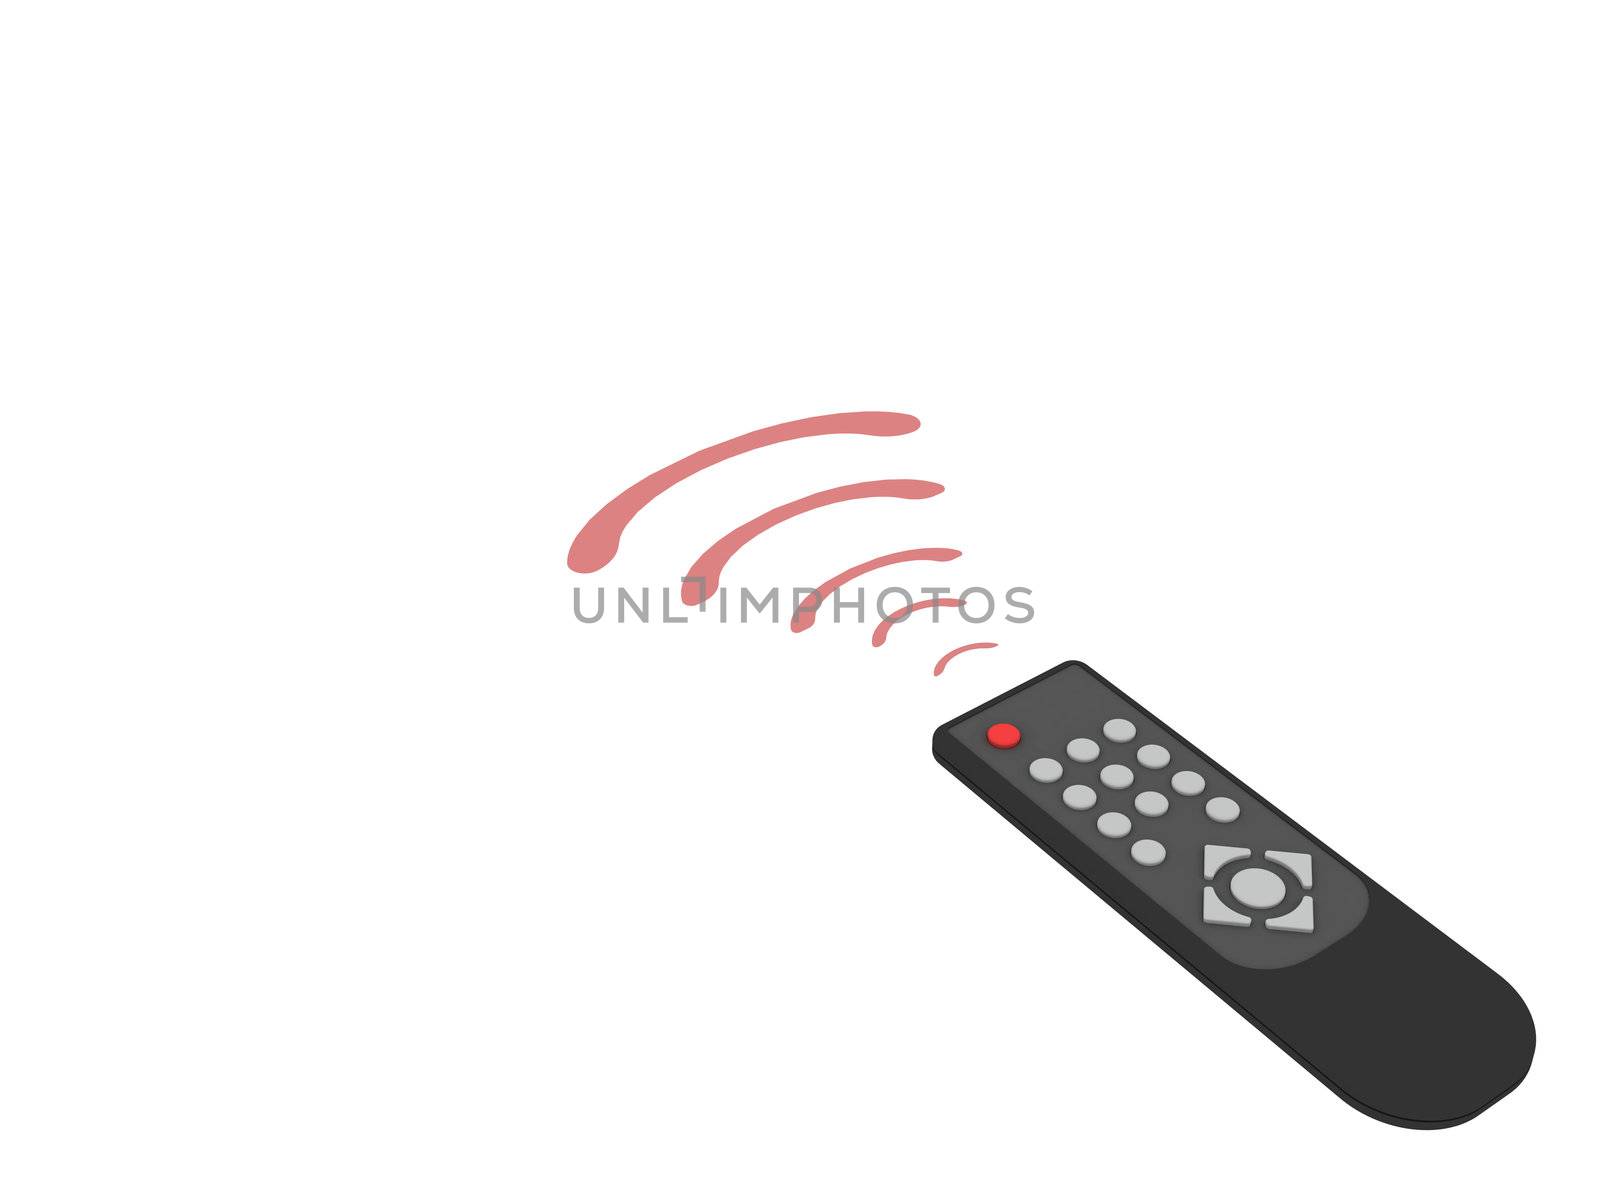 Universal remote control with red rays on white background. High resolution 3D image